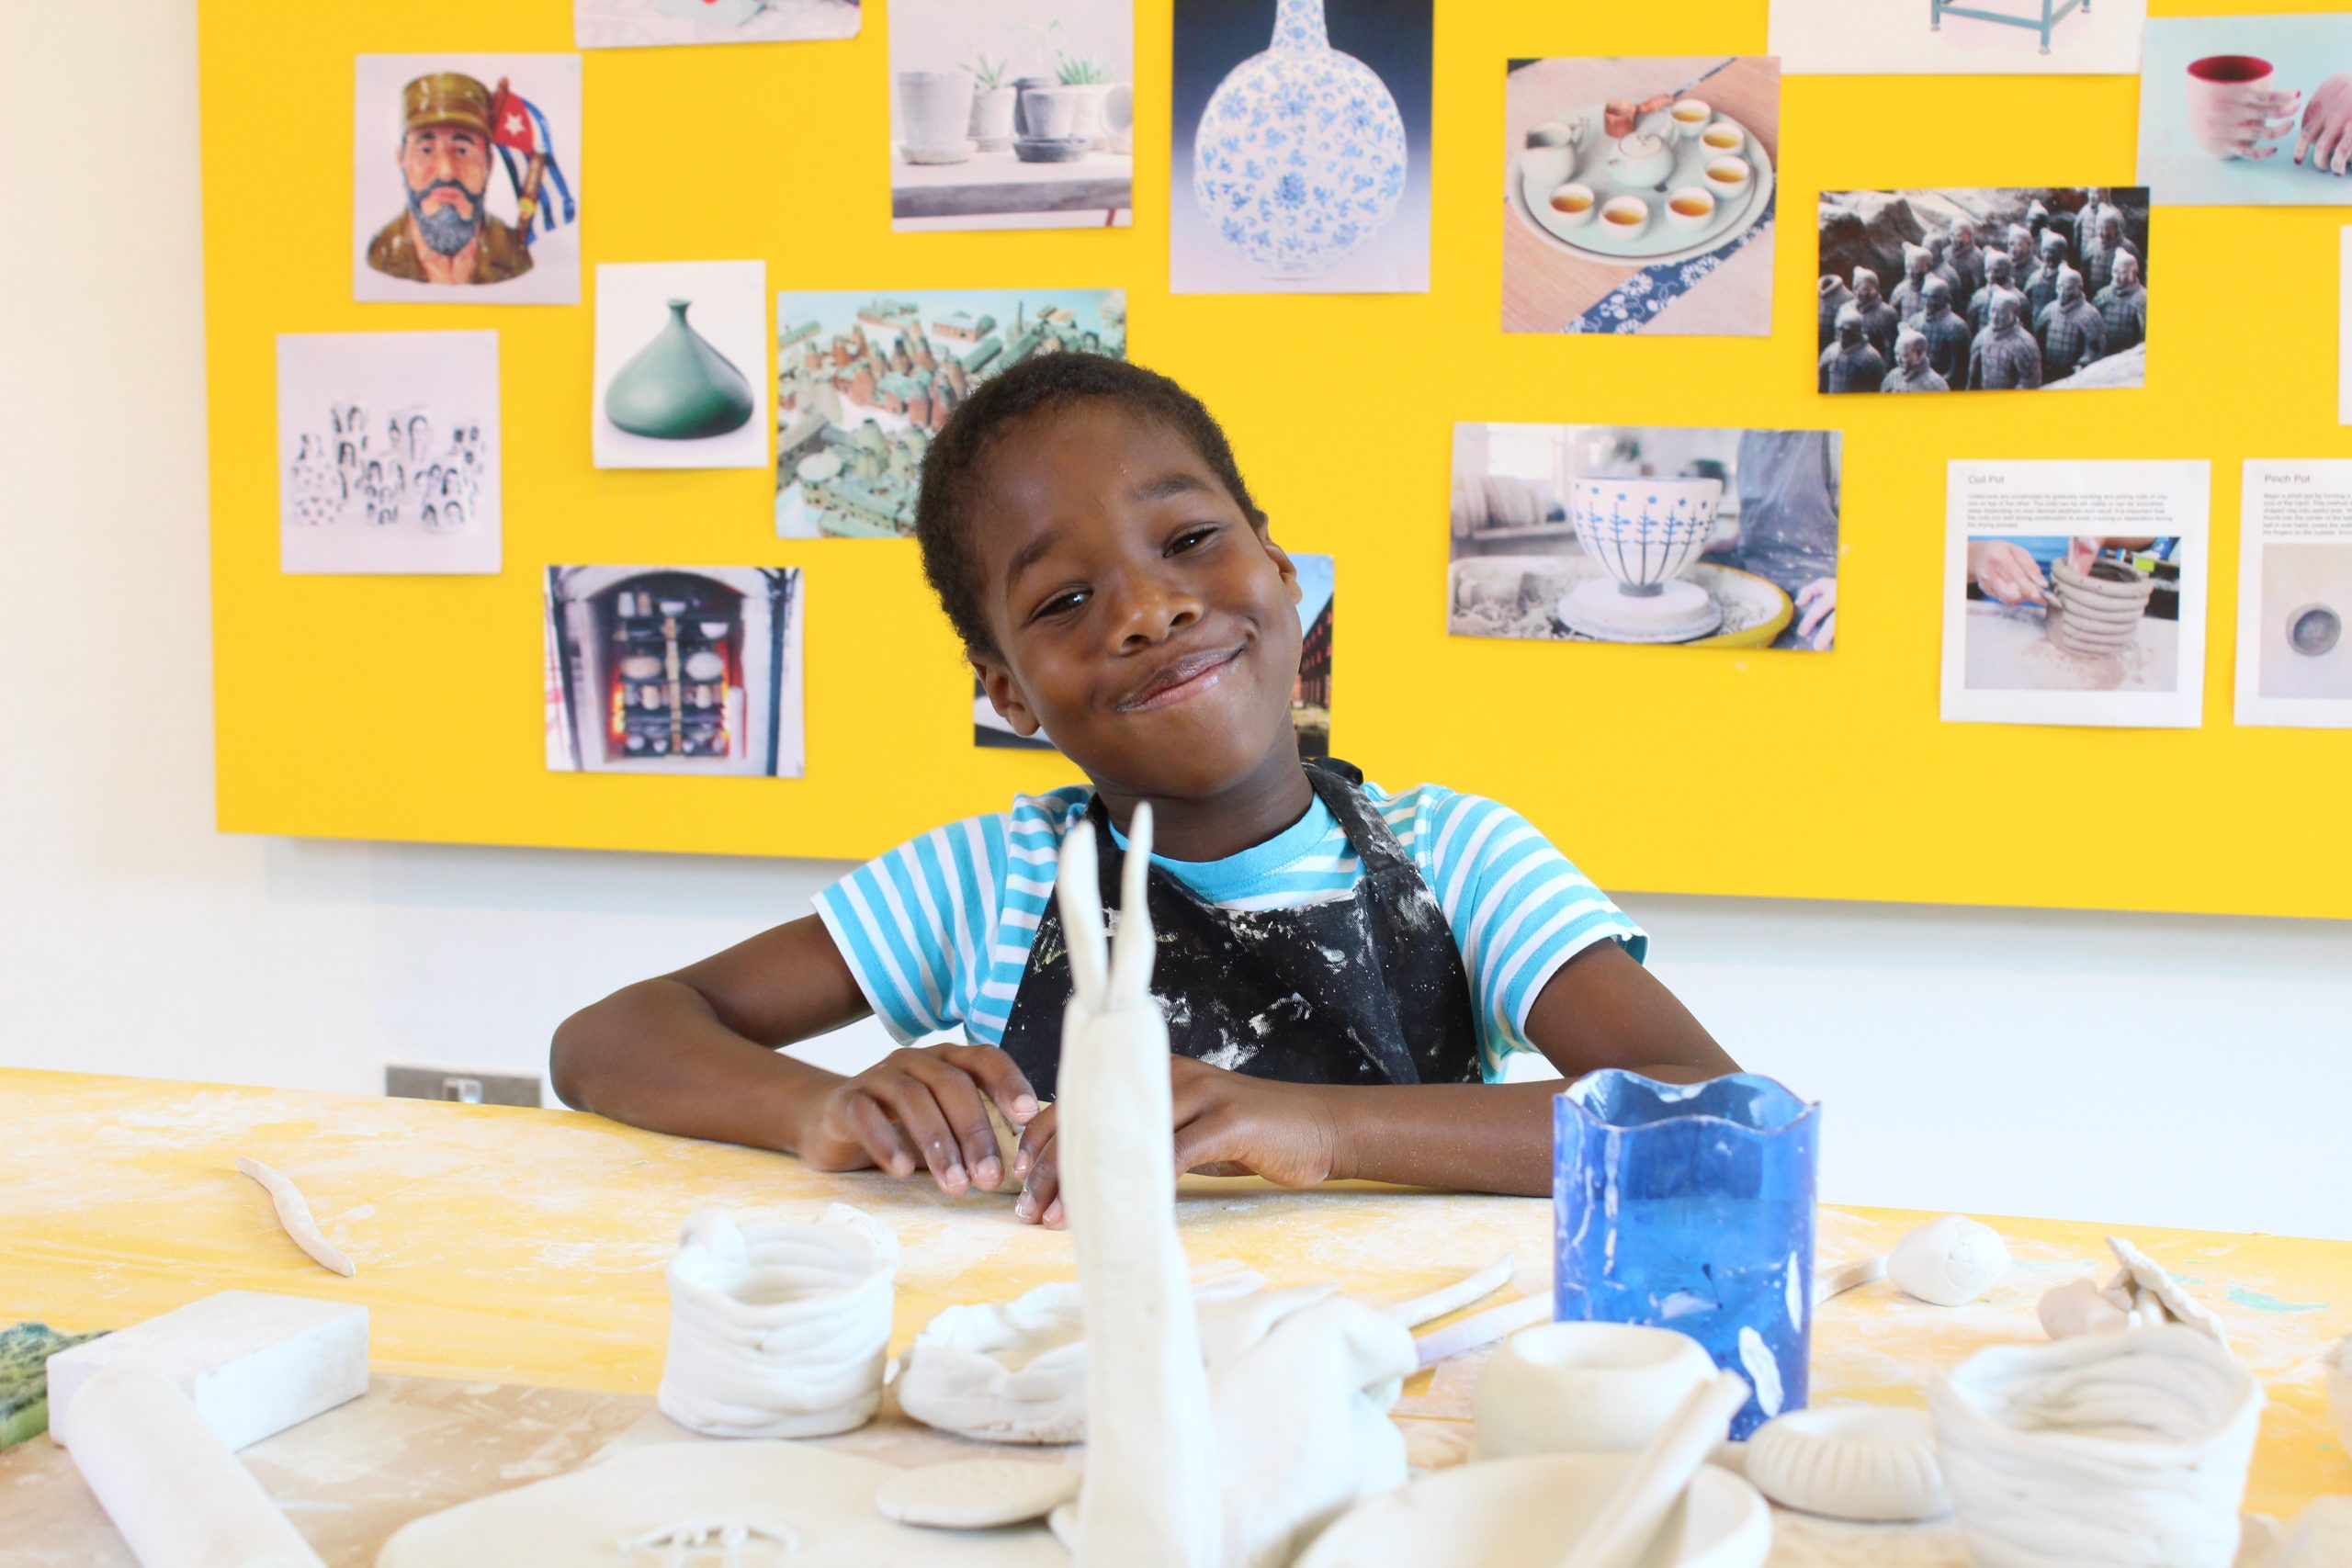 image of a child at Peckham Platform sitting at a table making something out of clay. There is a yellow board behind them with pictures on it.